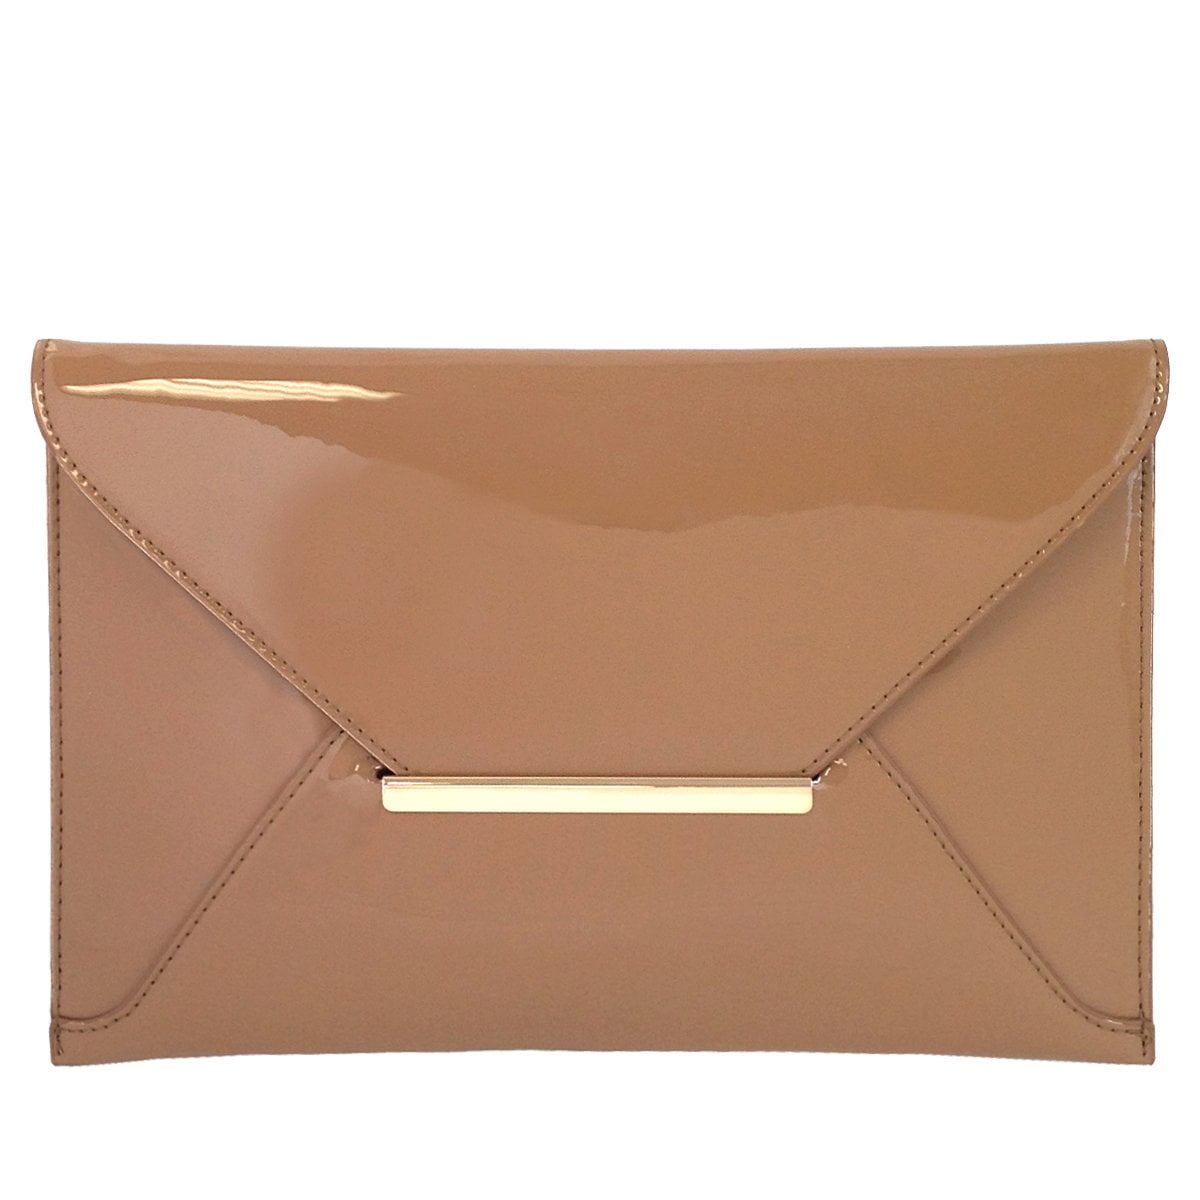 NEW NUDE FAUX PATENT LEATHER EVENING DAY CLUTCH BAG WEDDING PROM PARTY SHOULDER 